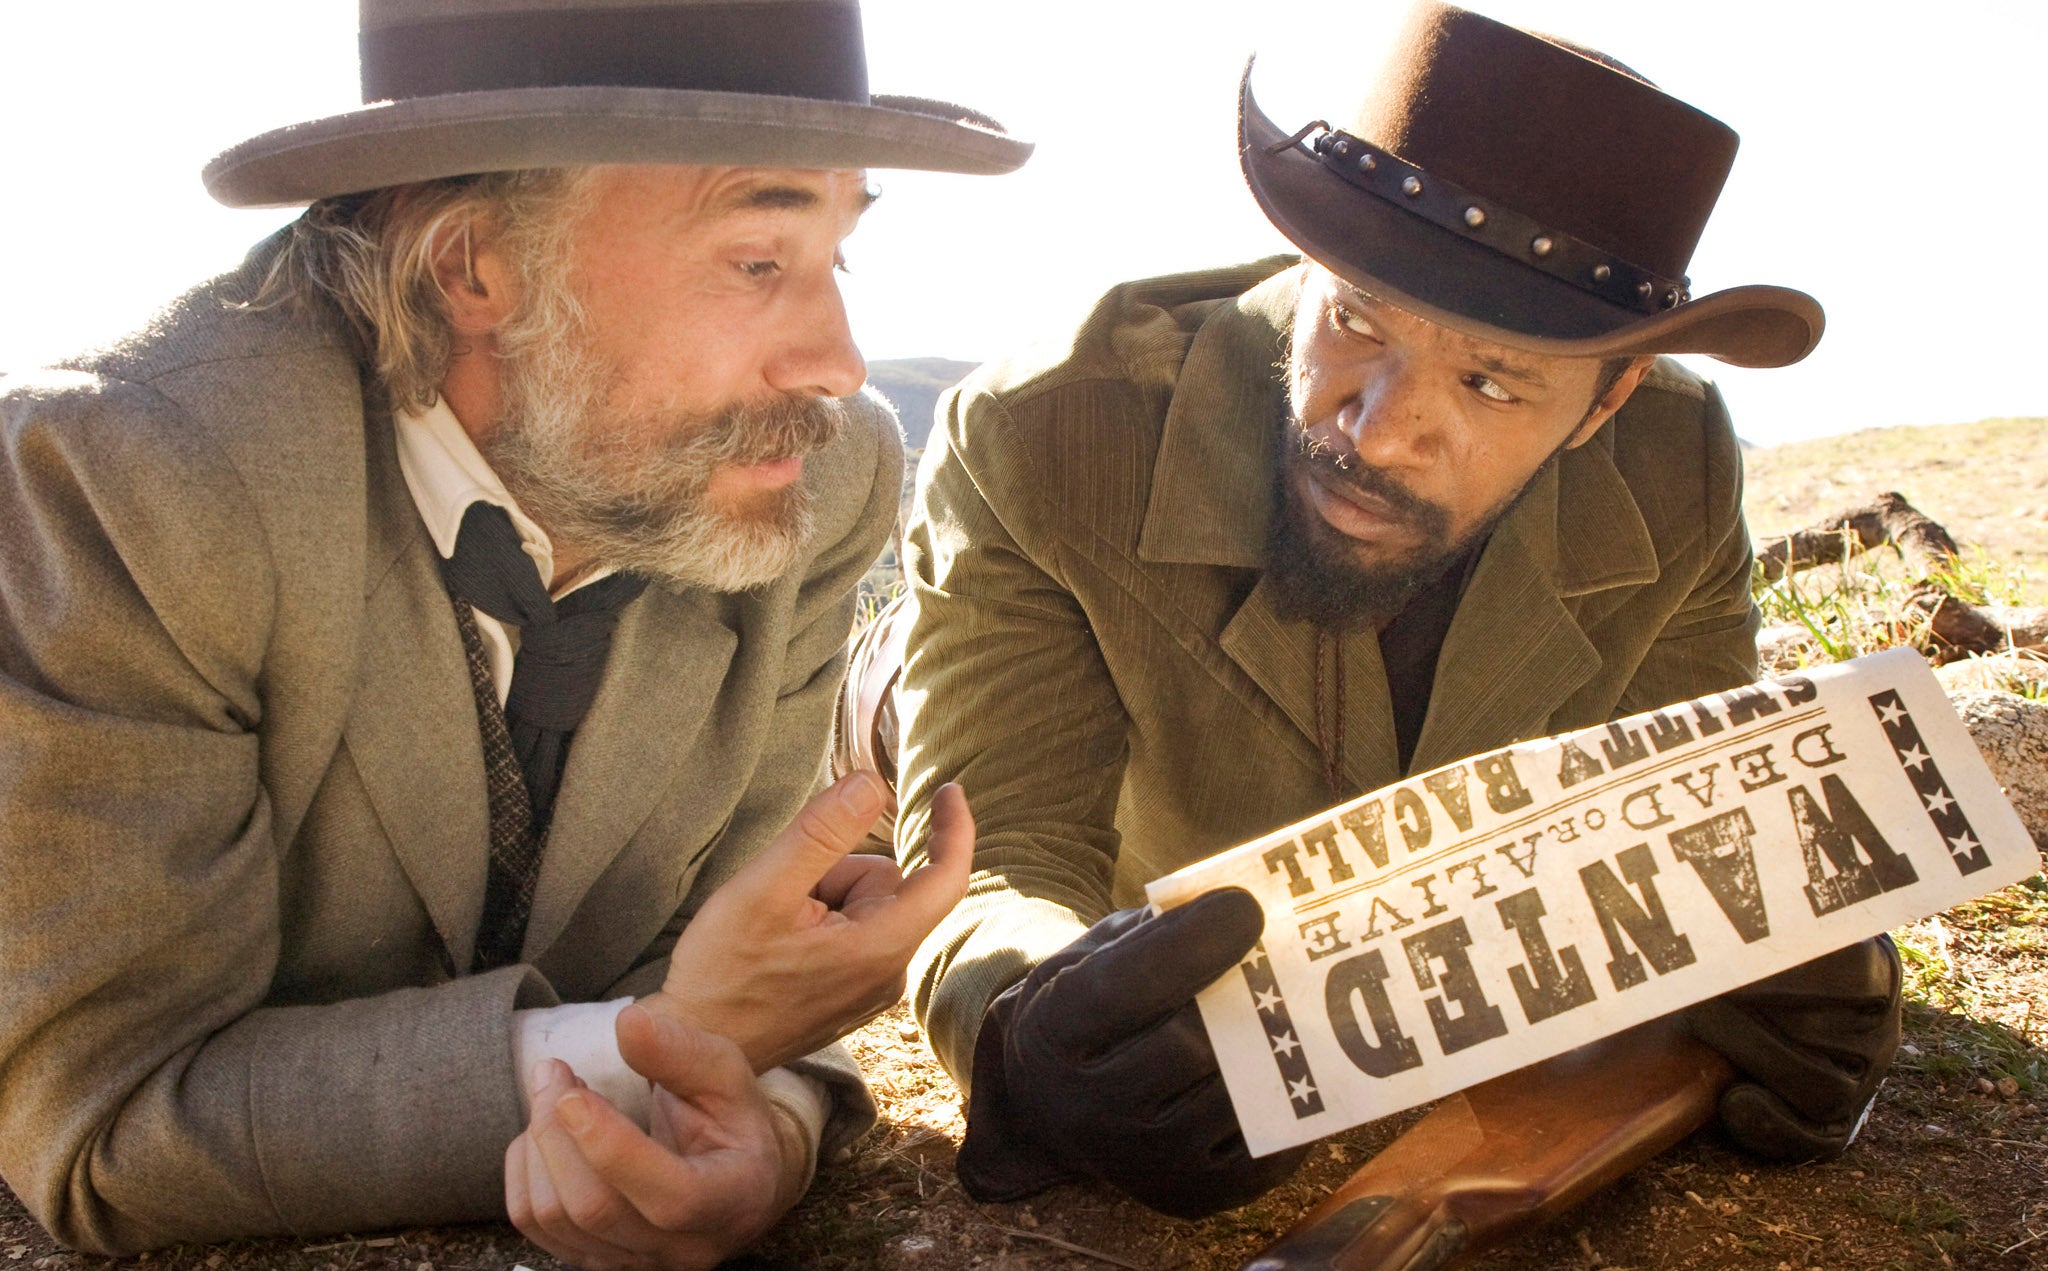 Christoph Waltz as Schultz and Jamie Foxx as Django in the film "Django Unchained," directed by Quentin Tarantino.